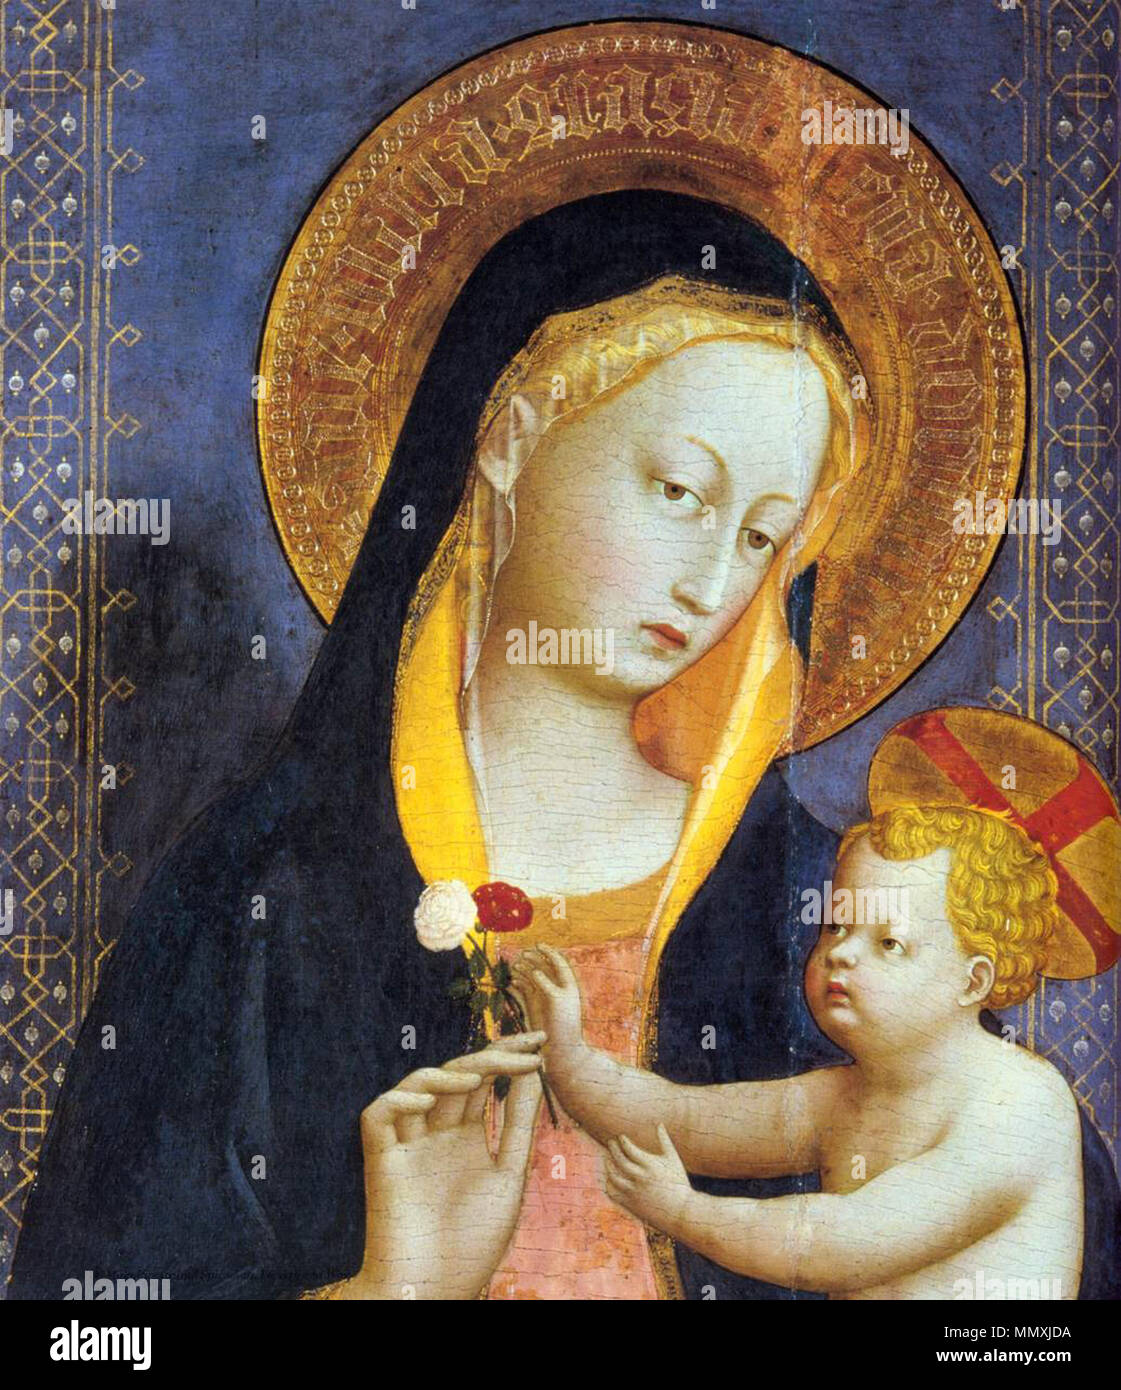 San Domenico Altarpiece (detail). between 1423 and 1424. Fra Angelico - San Domenico Altarpiece (detail) - WGA00446 Stock Photo